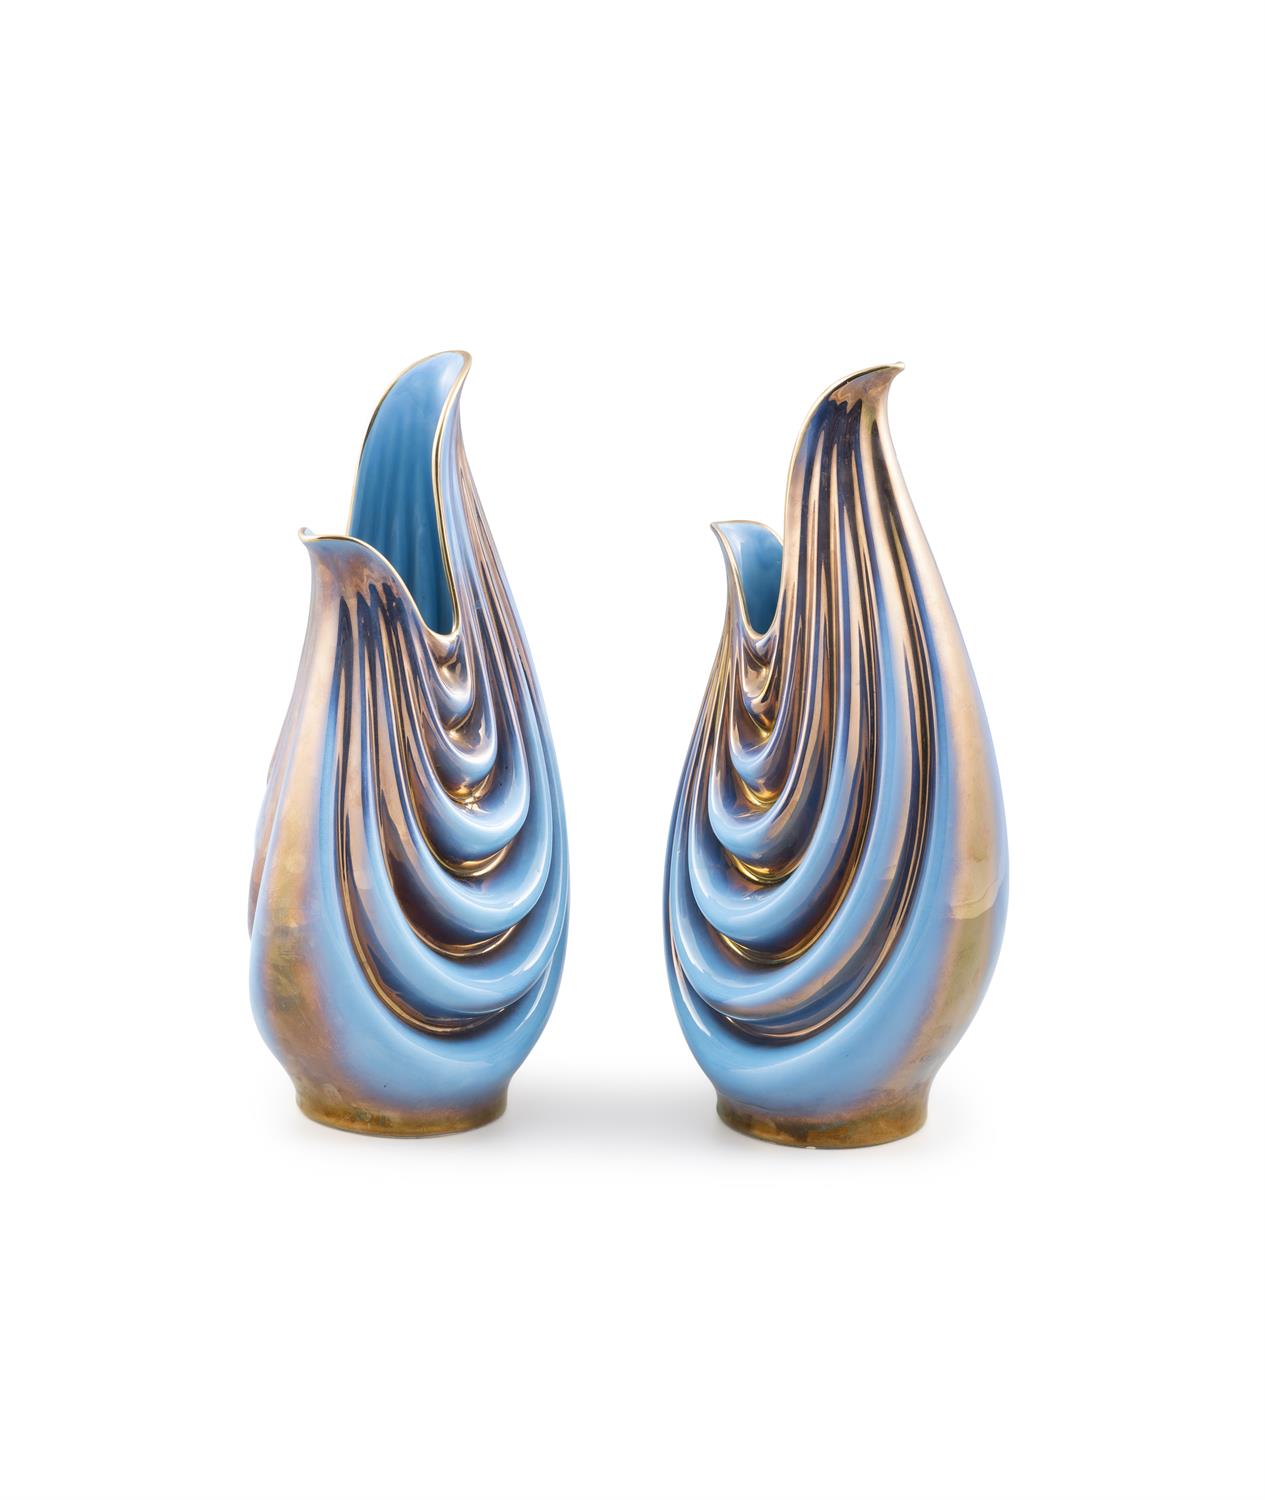 SICAS SESTO FIOR A pair of ceramic vases by Sicas Sesto Fior. Italy, c. 1970, with maker's mark. - Image 2 of 5